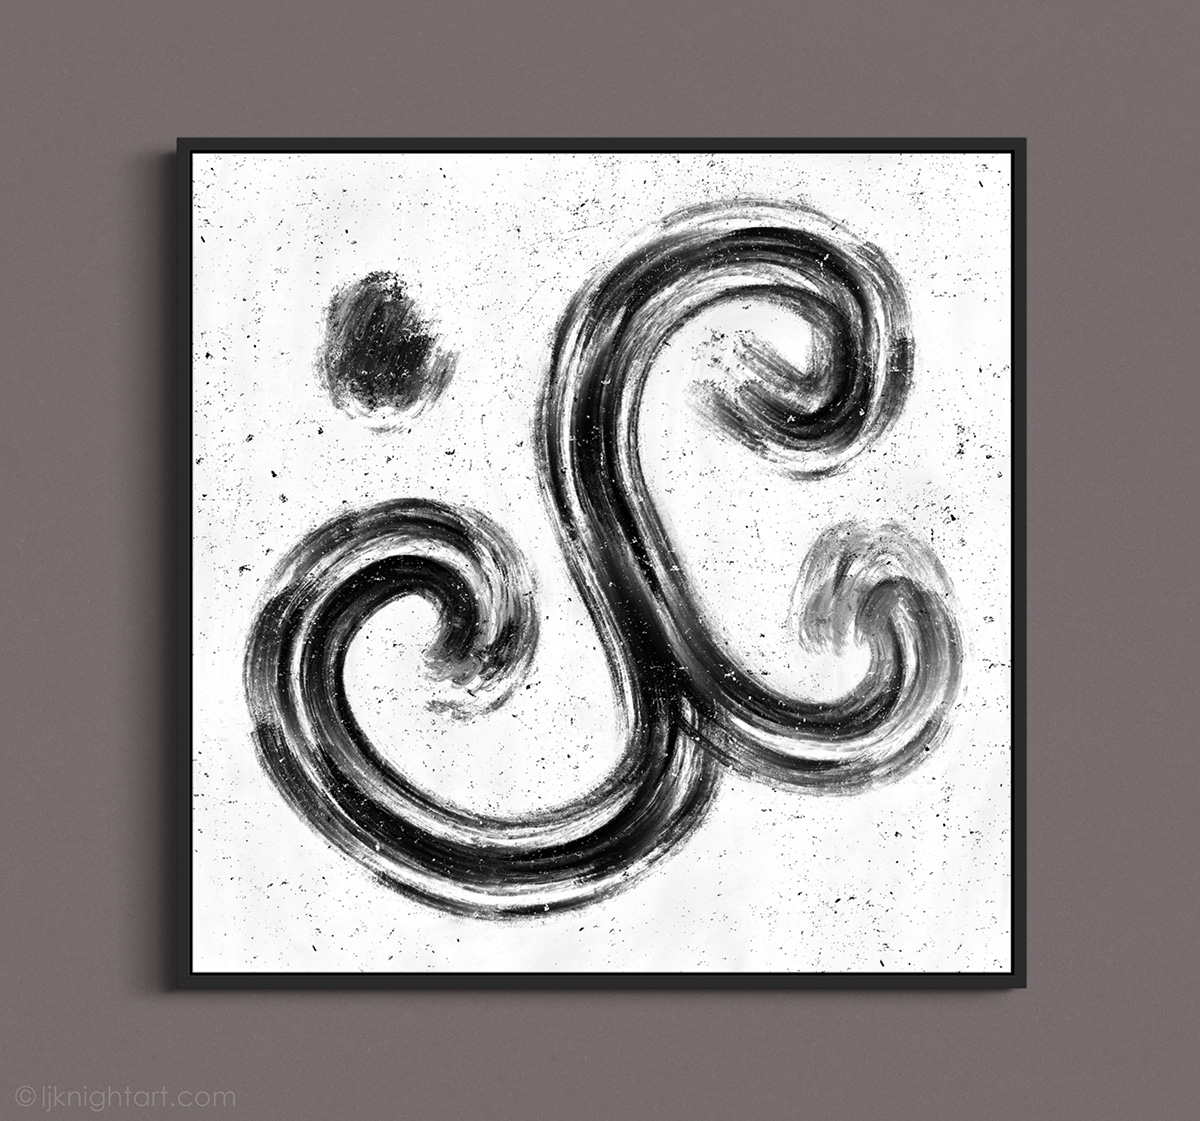 Bold Black Brush Stroke Monochrome Abstract Painting - contemporary abstract art by L.J. Knight